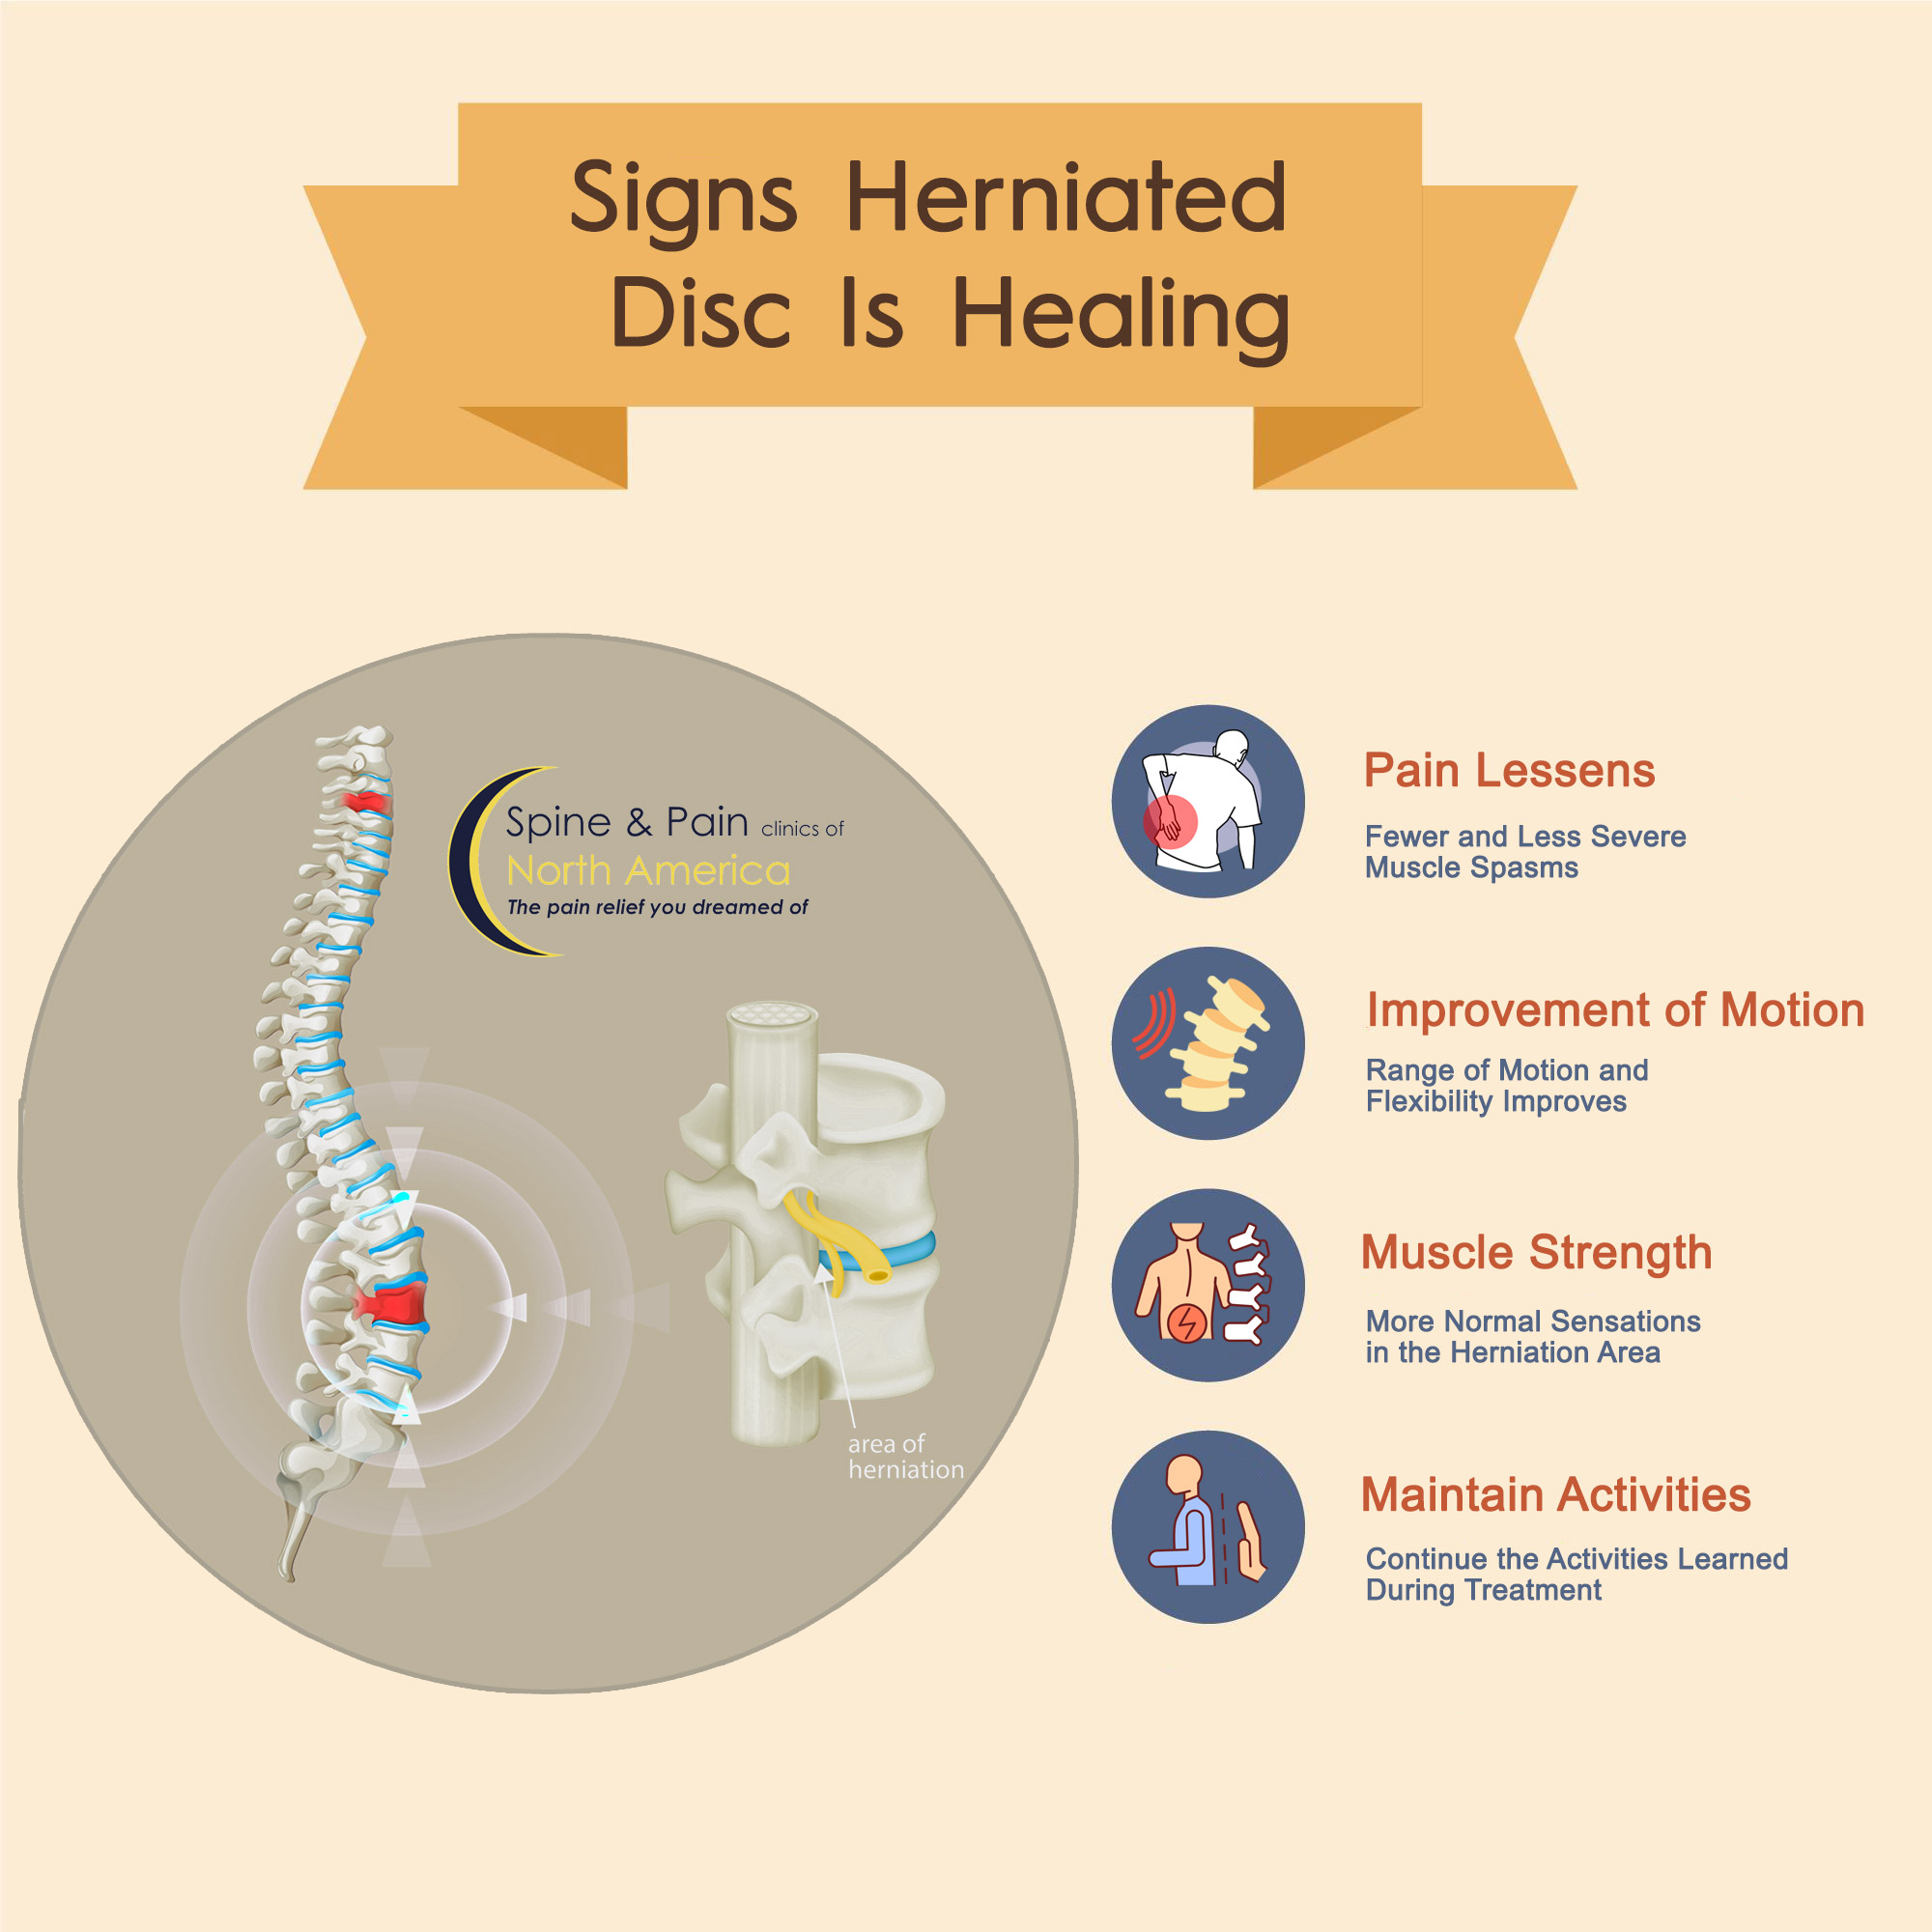 Signs Herniated Disc Is Healing